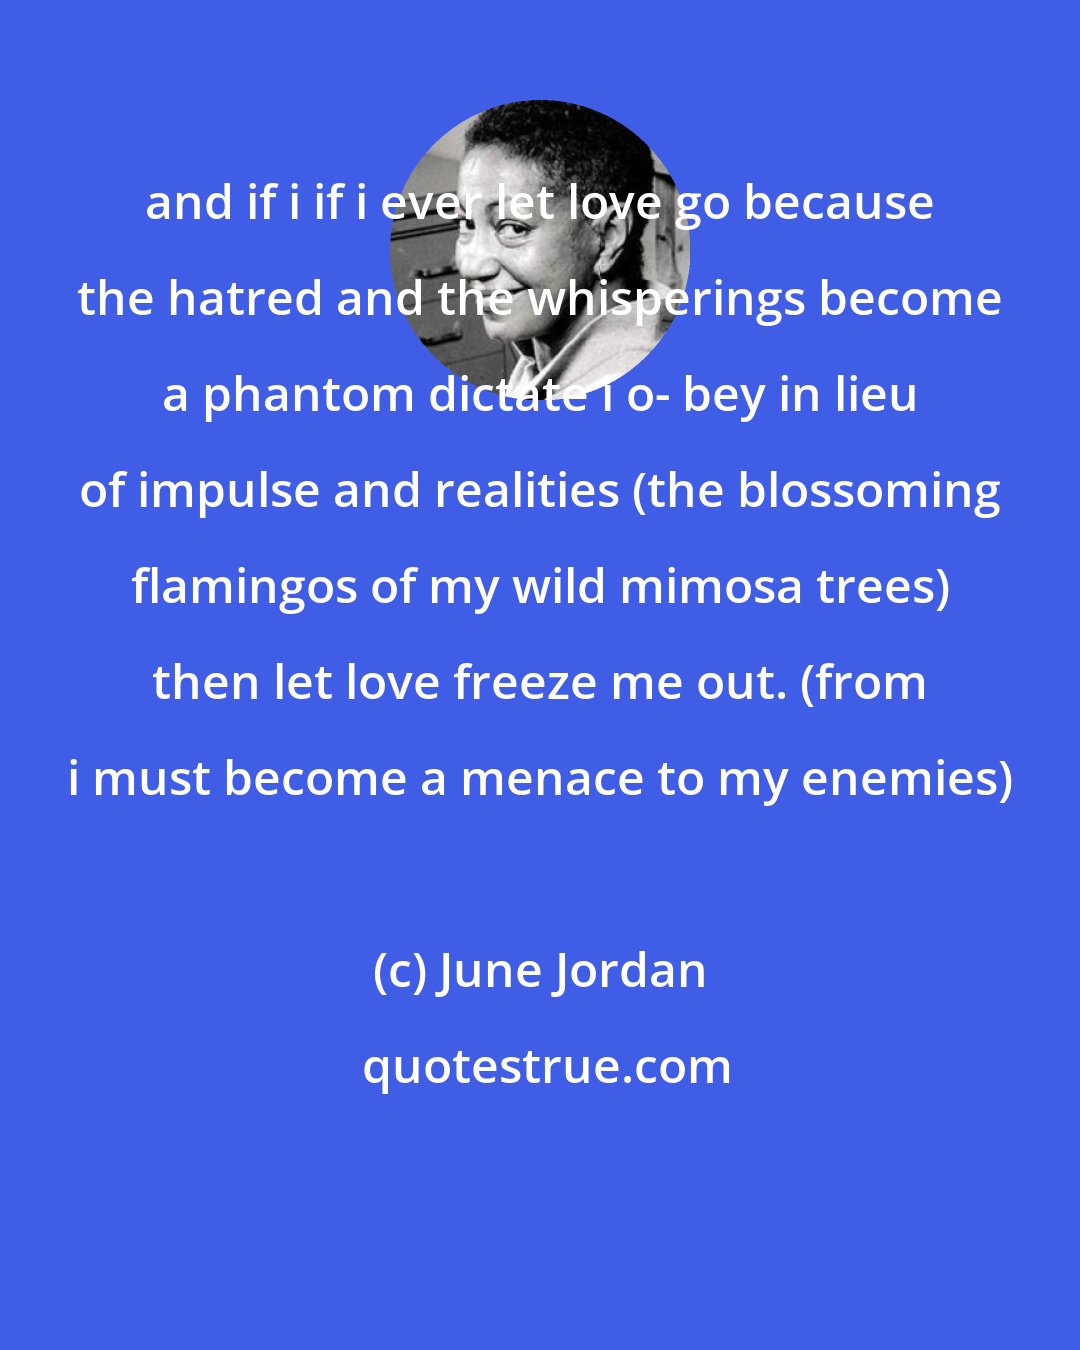 June Jordan: and if i if i ever let love go because the hatred and the whisperings become a phantom dictate i o- bey in lieu of impulse and realities (the blossoming flamingos of my wild mimosa trees) then let love freeze me out. (from i must become a menace to my enemies)